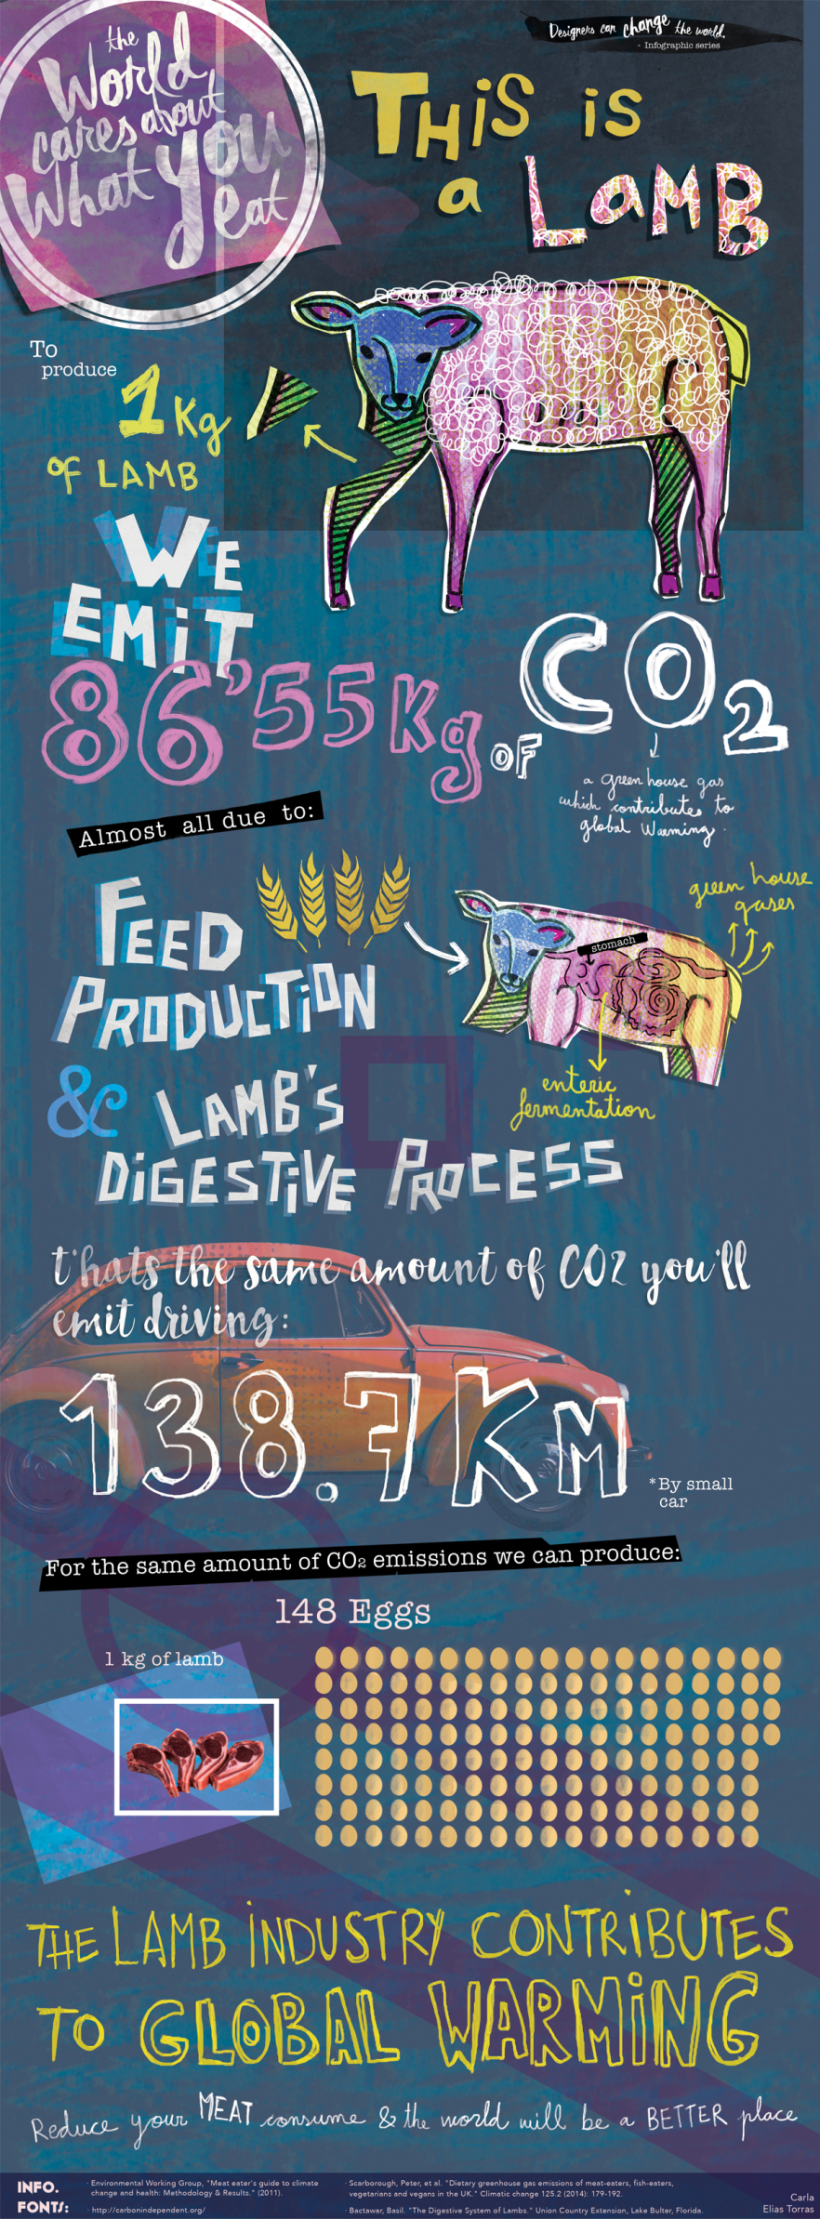 The world cares about what you eat, infographic series. 0